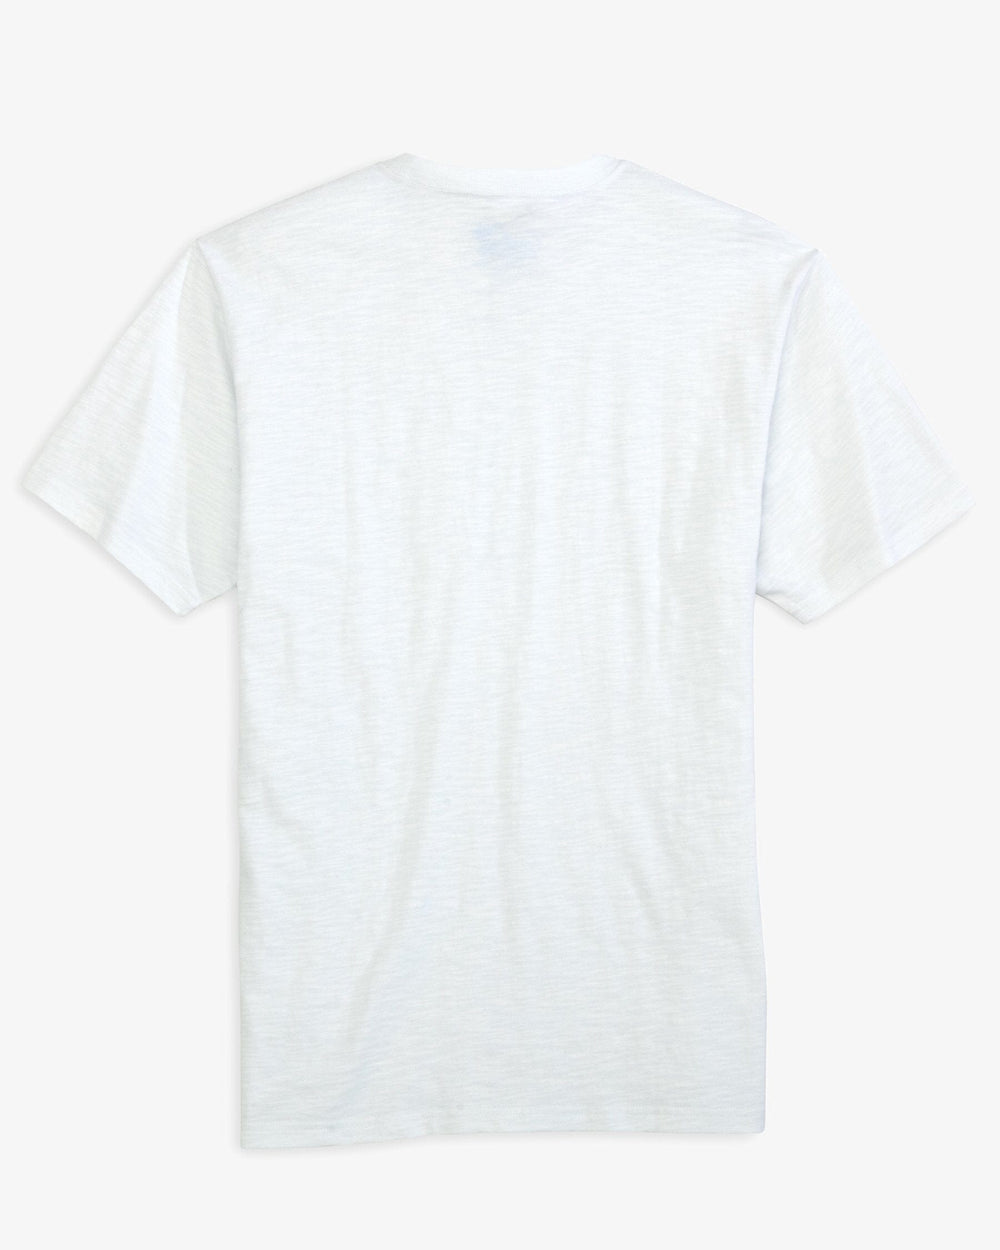 The back of the Men's Sun Farer Short Sleeve T-Shirt by Southern Tide - Classic White